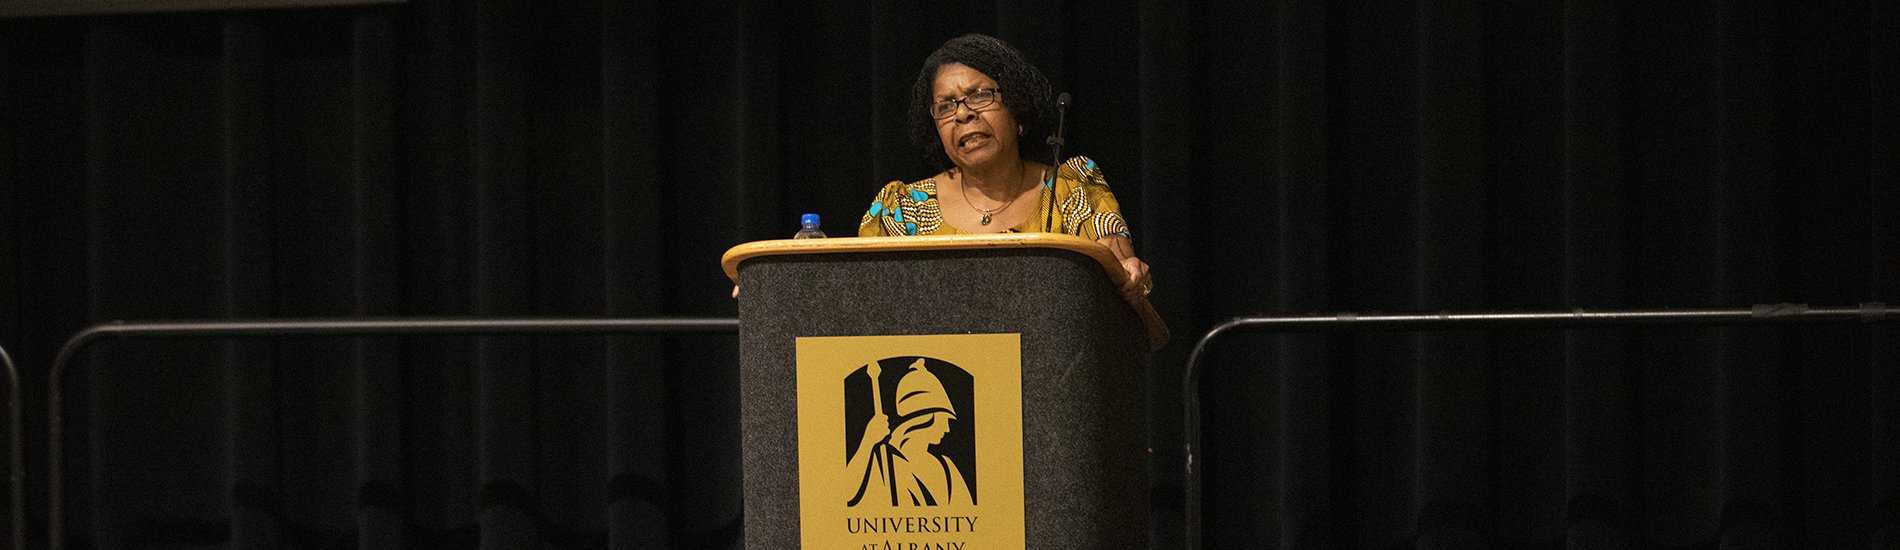 Prof. Marcia Sutherland introduces Poet Nikki Giovanni at a New York State Writers Institute event to celebrate the 50th Anniversary of the Department of Africana Studies at the University at Albany on Thursday, October 10, 2019. (photo by Patrick Dodson)